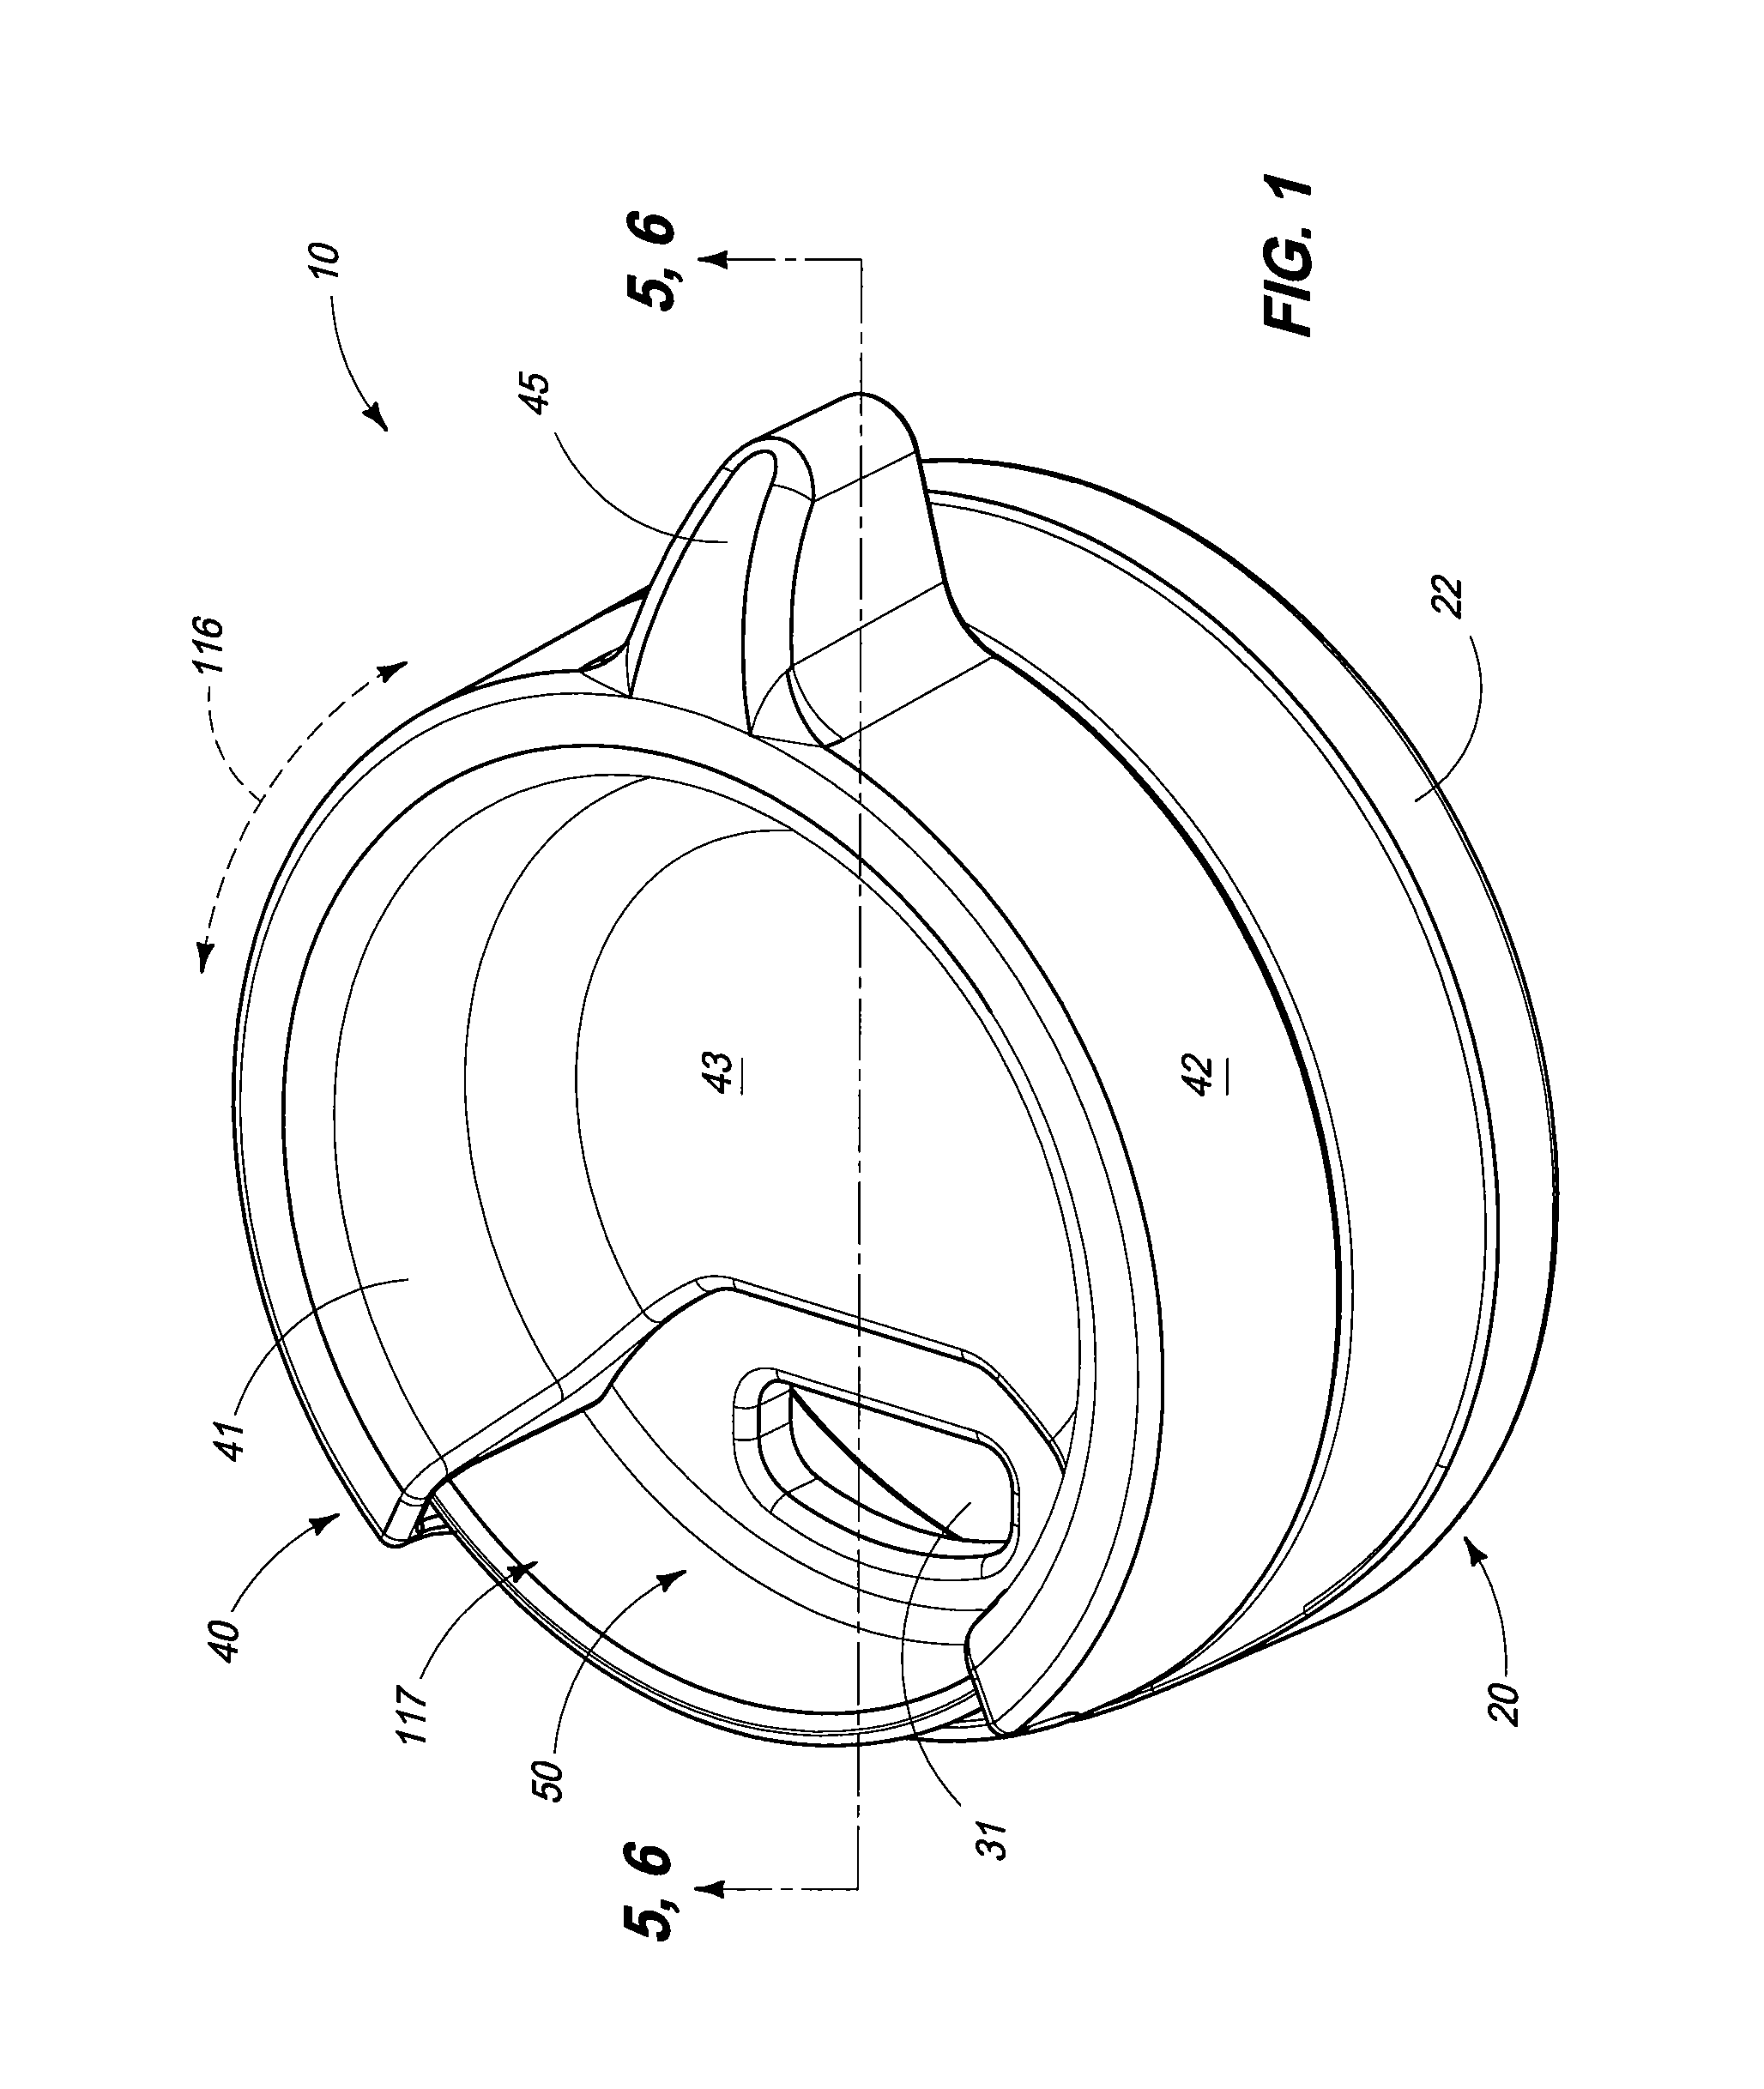 Flow control valve for dispensing a source of fluid